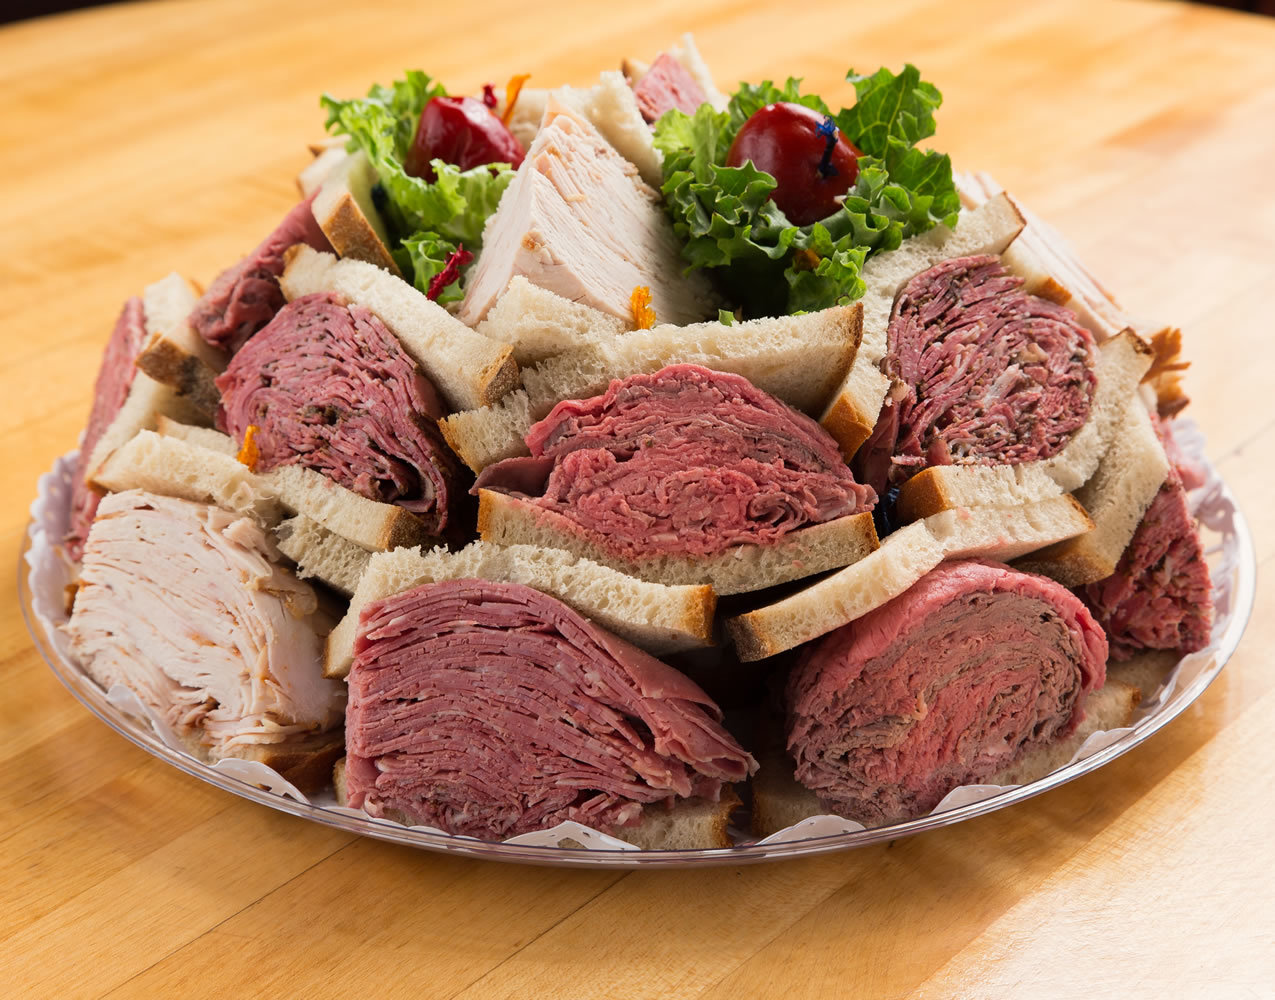 Sandwich Platter - Cateing For Any Occasiion!